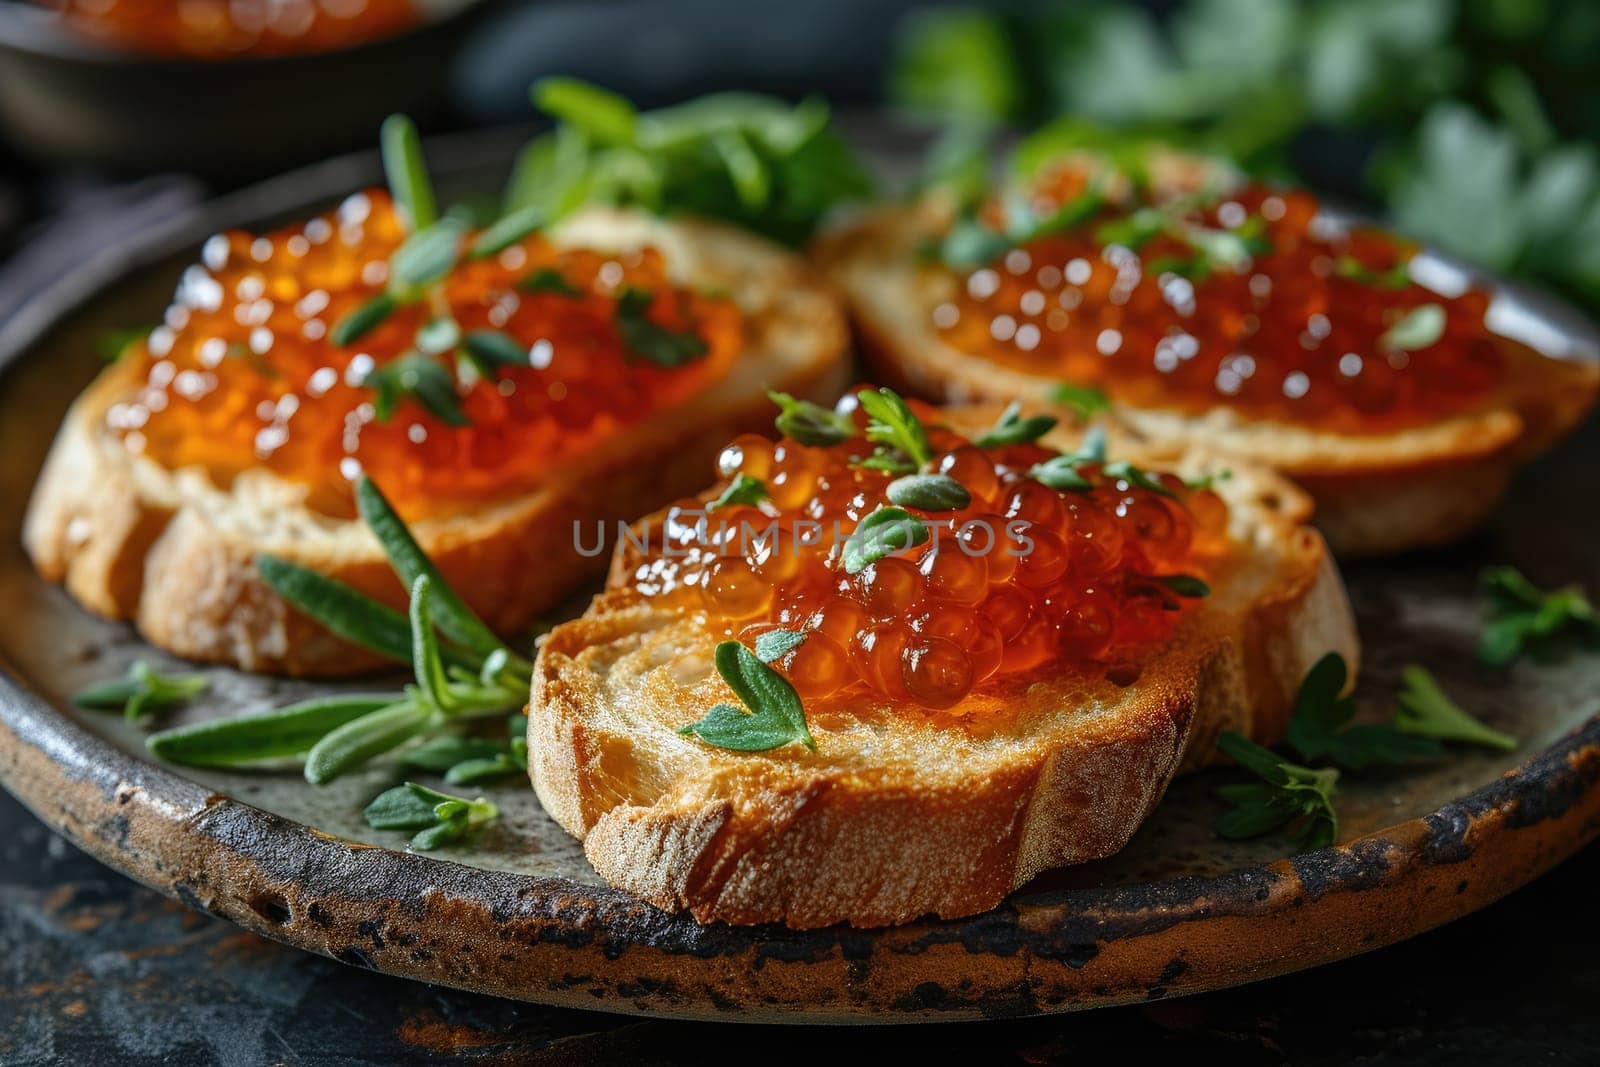 Sandwich with red caviar on a wooden table: a treat for connoisseurs of taste by Yurich32